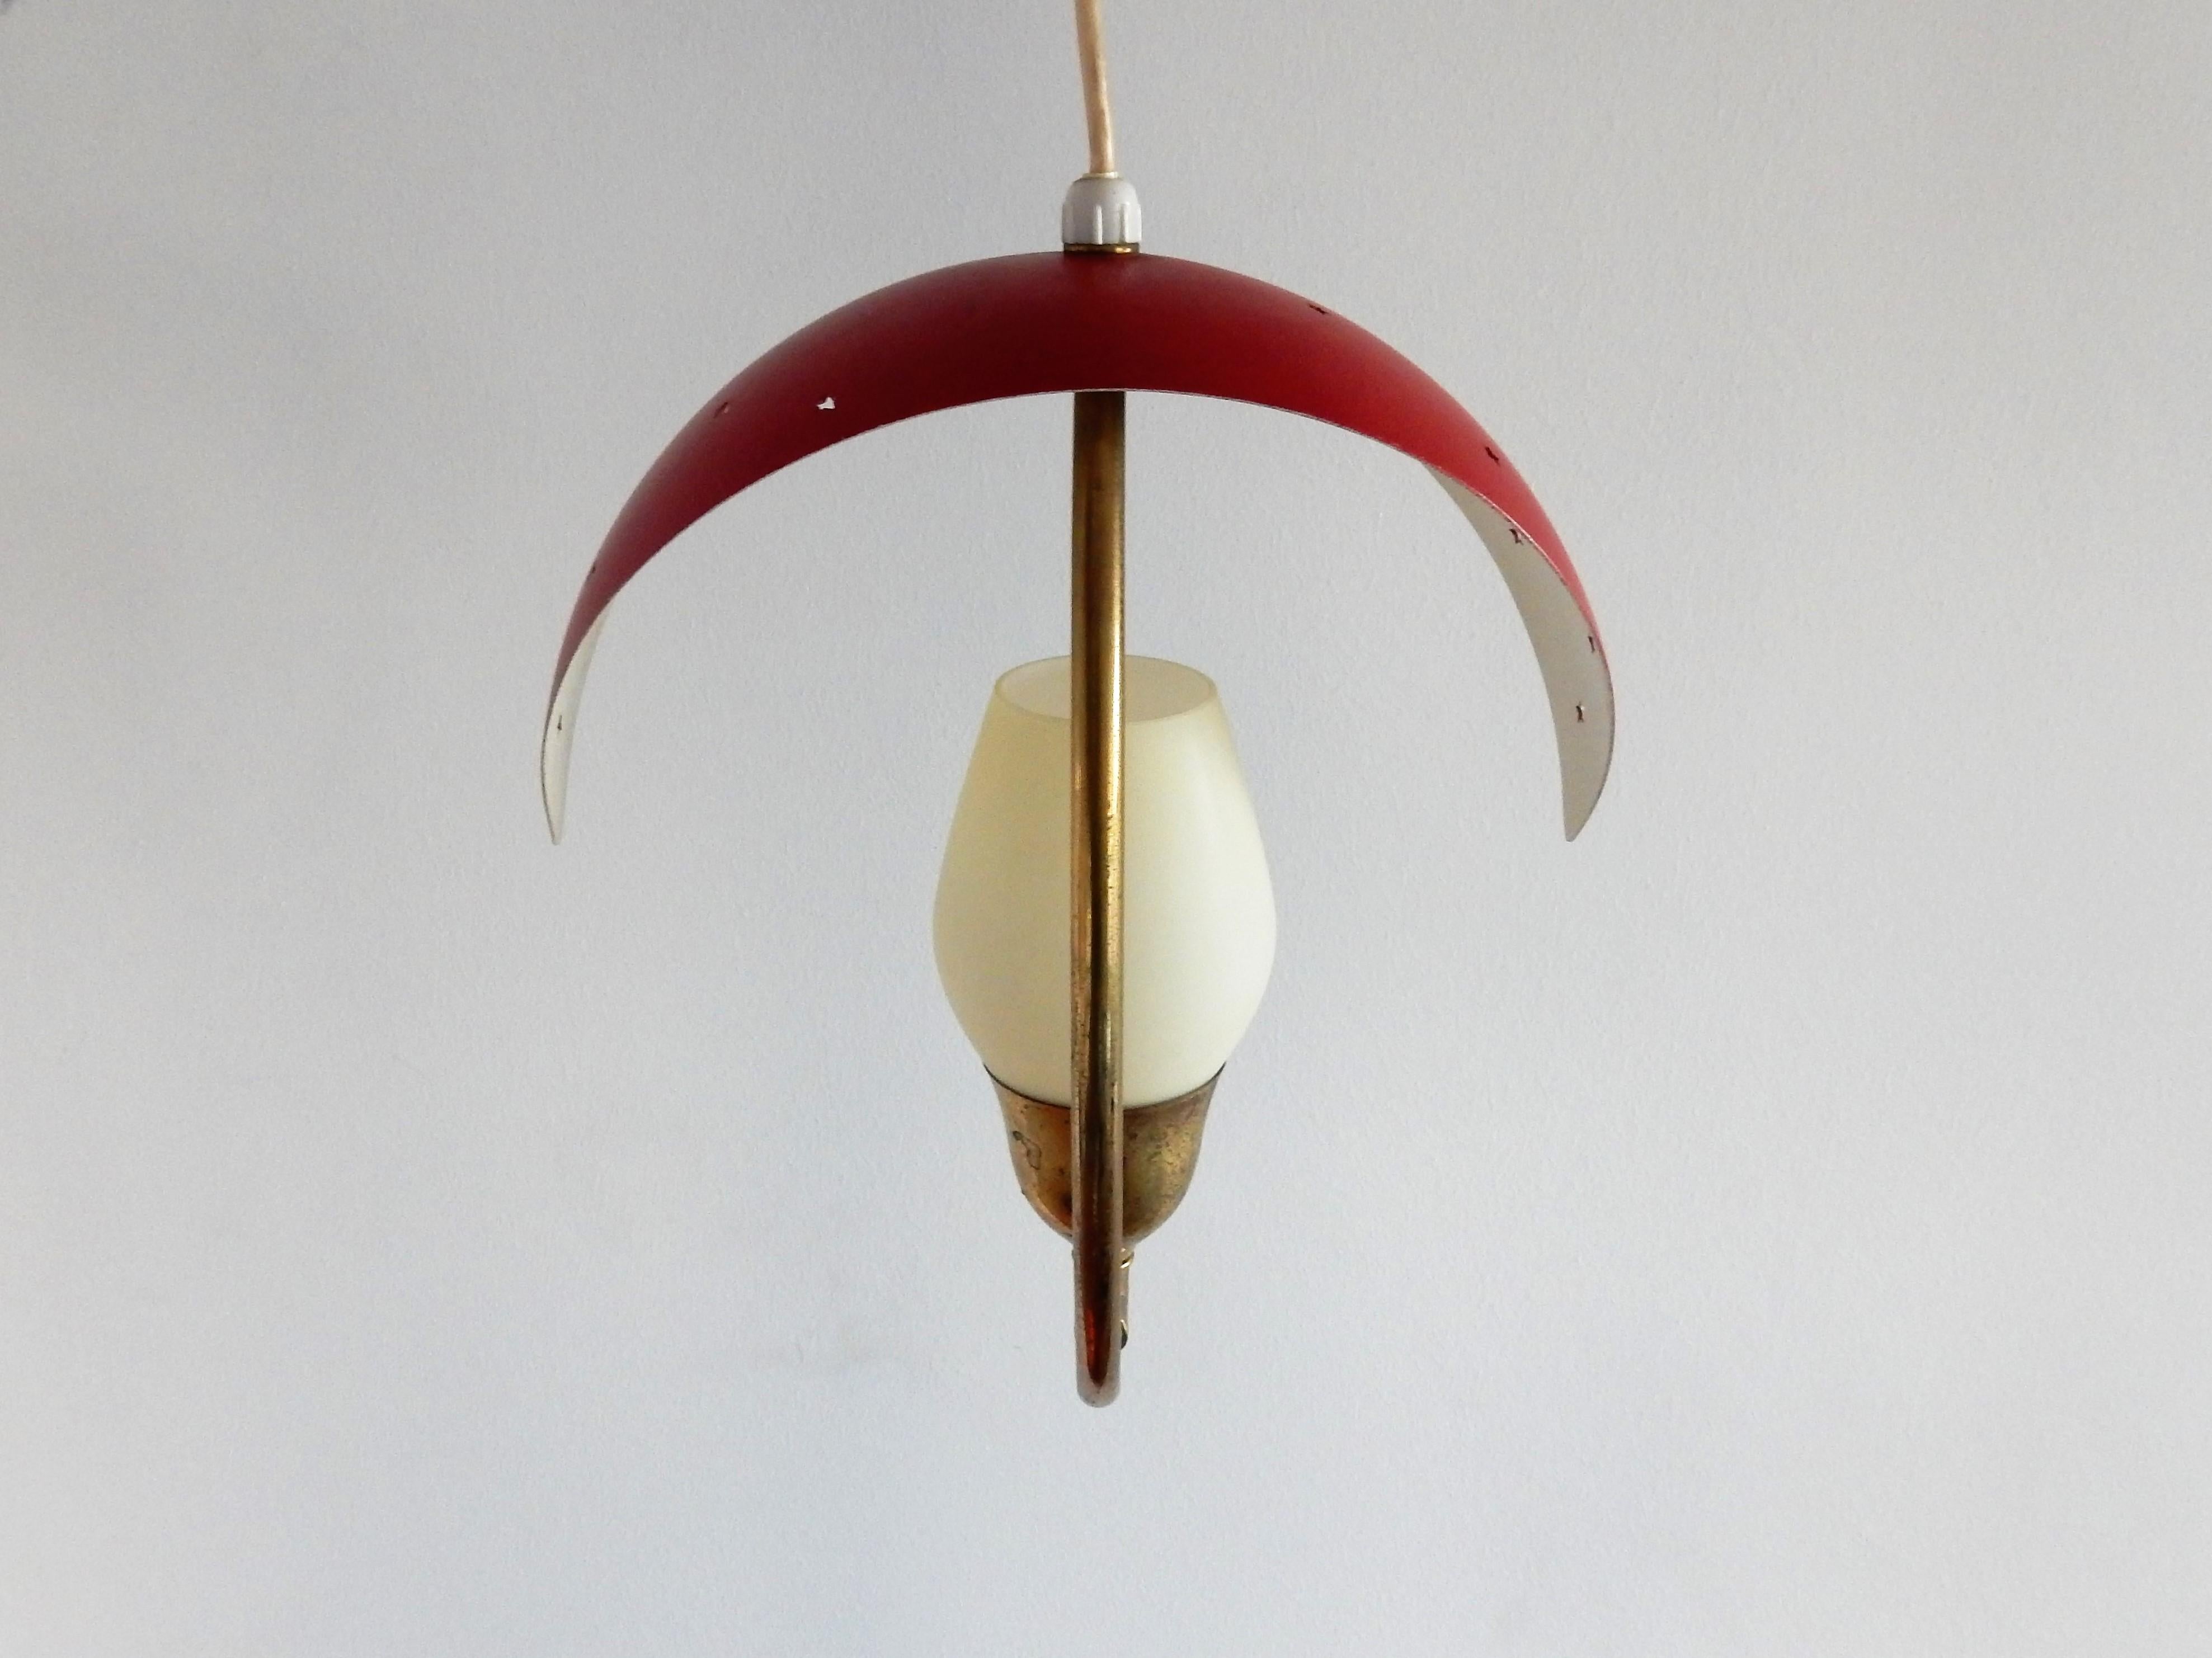 This stunning small pendant lamp has a brass frame, a red lacquered metal shade with star shaped perforations and a small opaline glass shade that diffuses the light. A very nice design that suits well in a corridor or bedroom for example. It is in